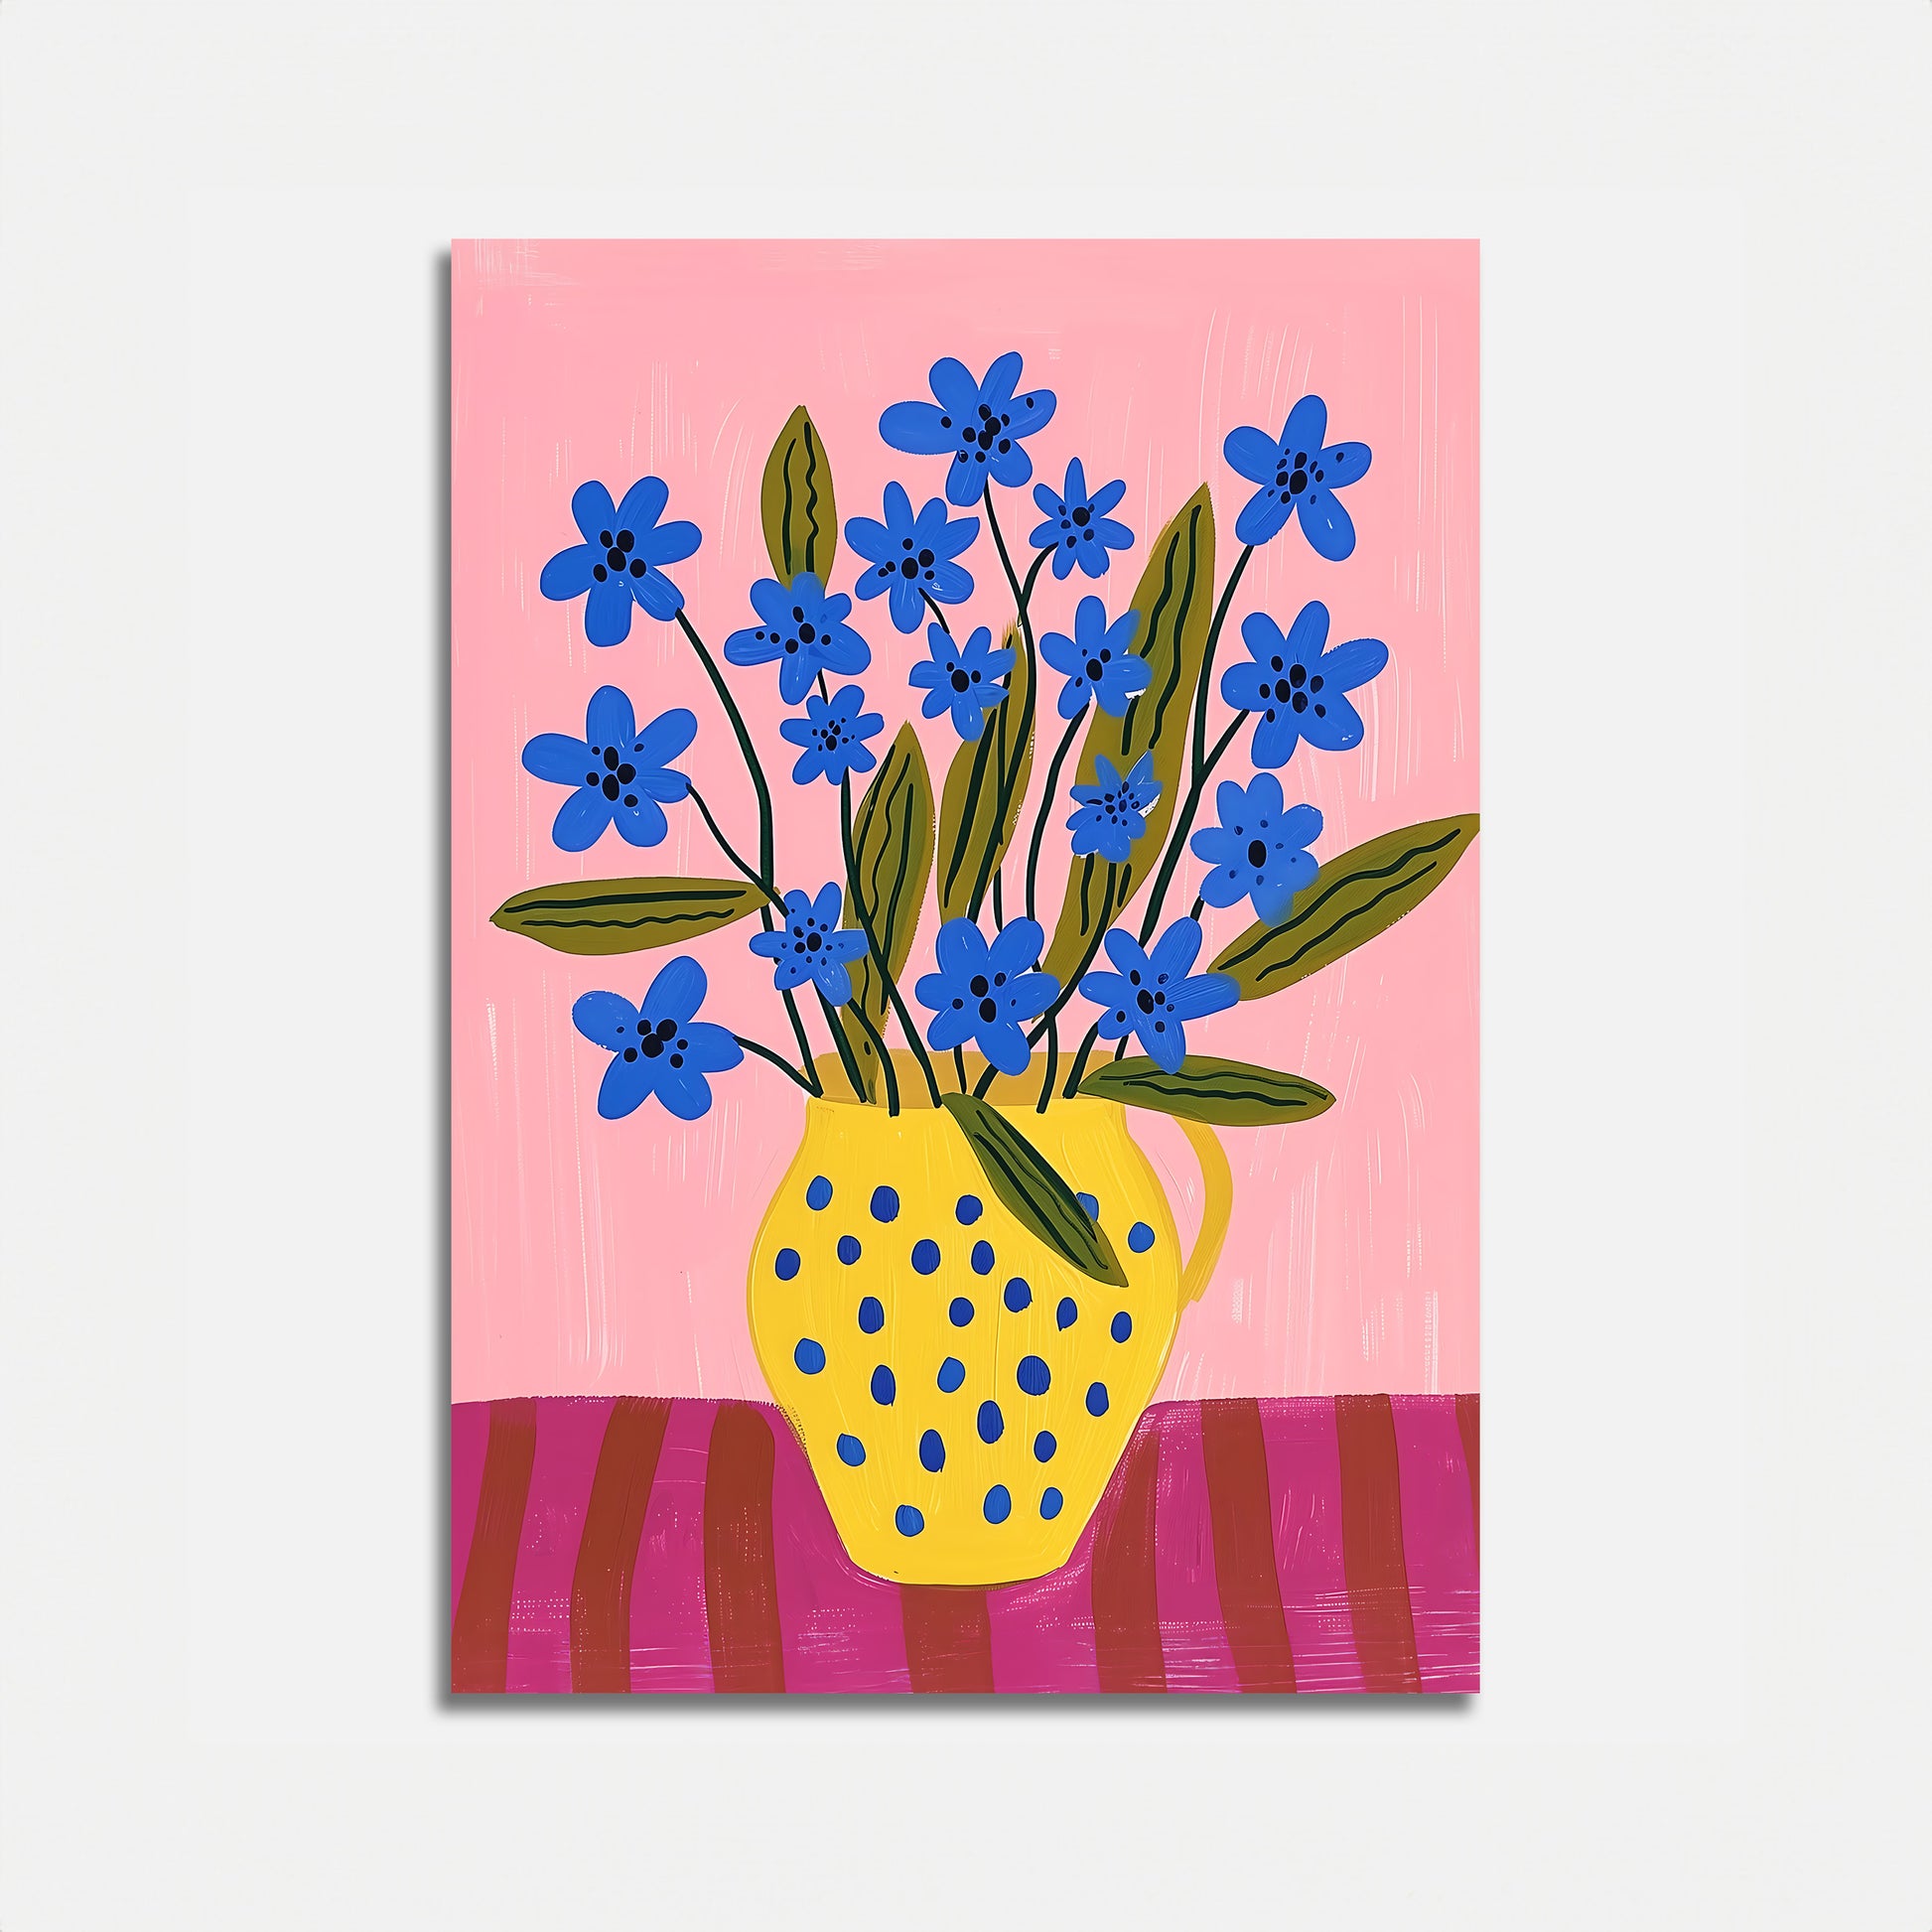 A colorful illustration of blue flowers in a yellow dotted vase against a pink background.